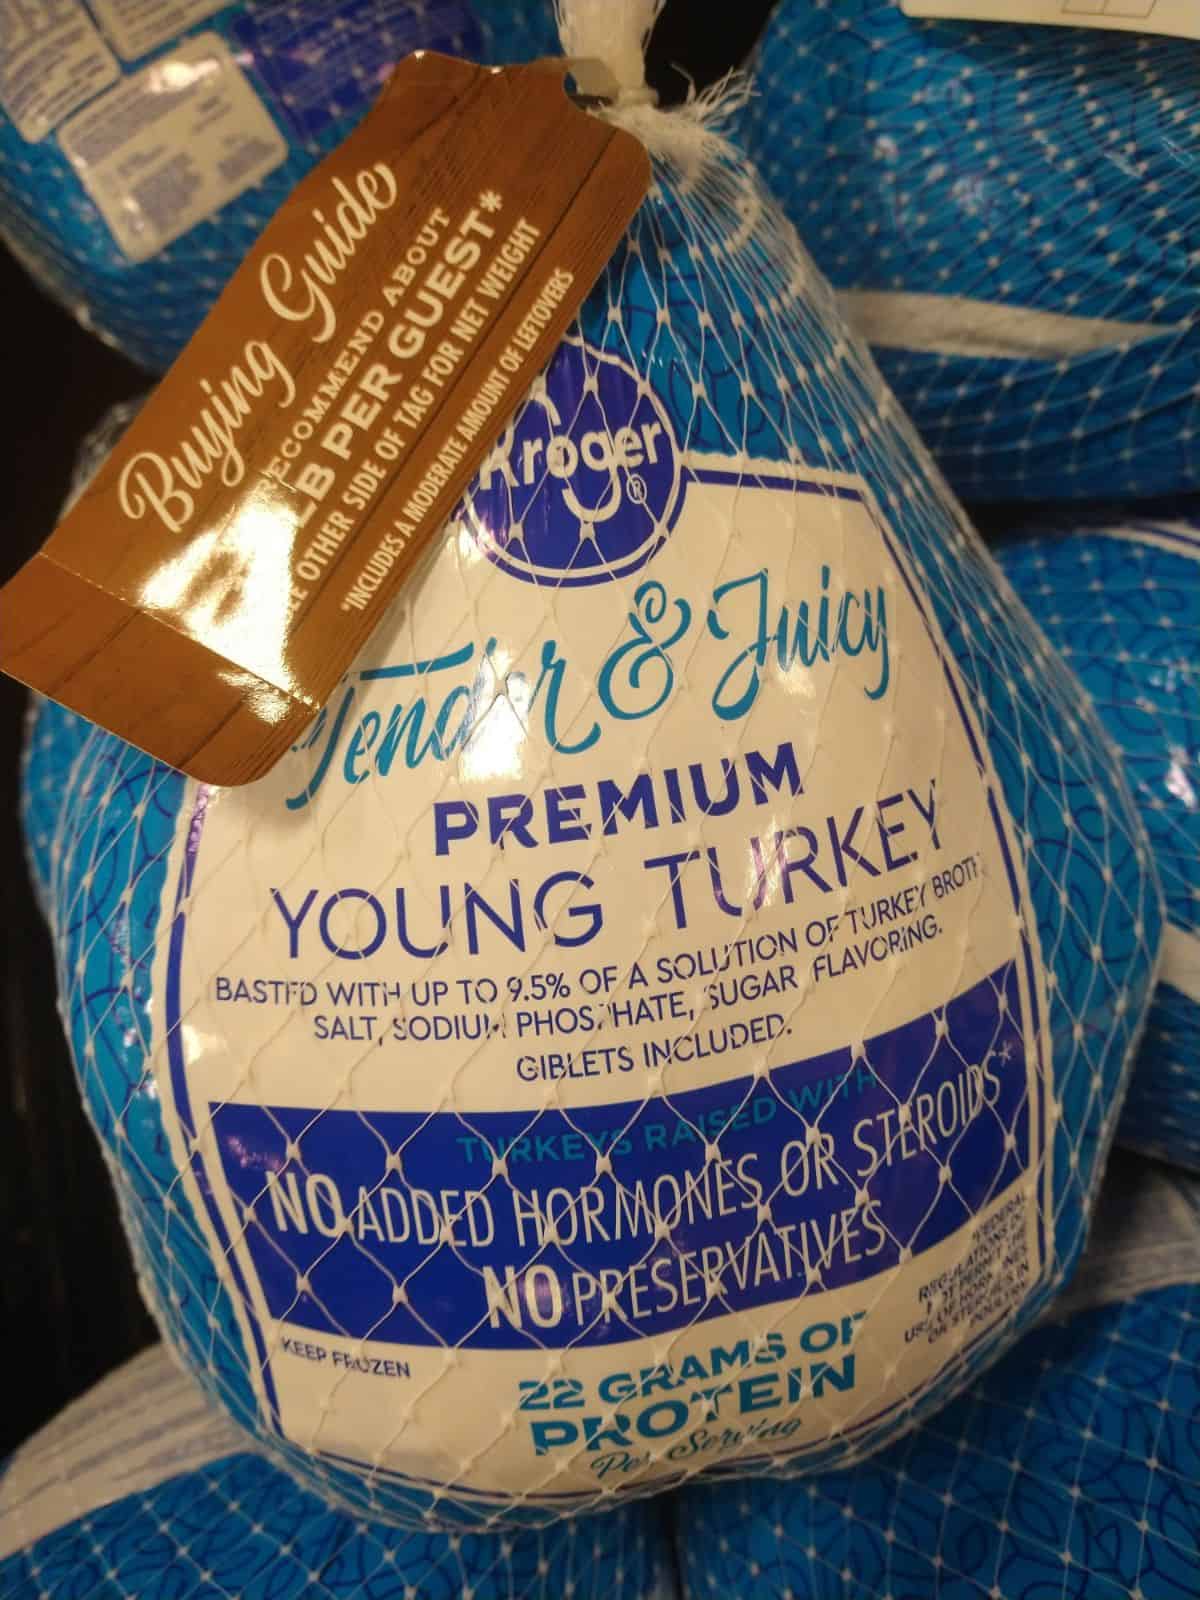 Kroger Tender and Juicy Frozen young turkey in blue and white packaging. 